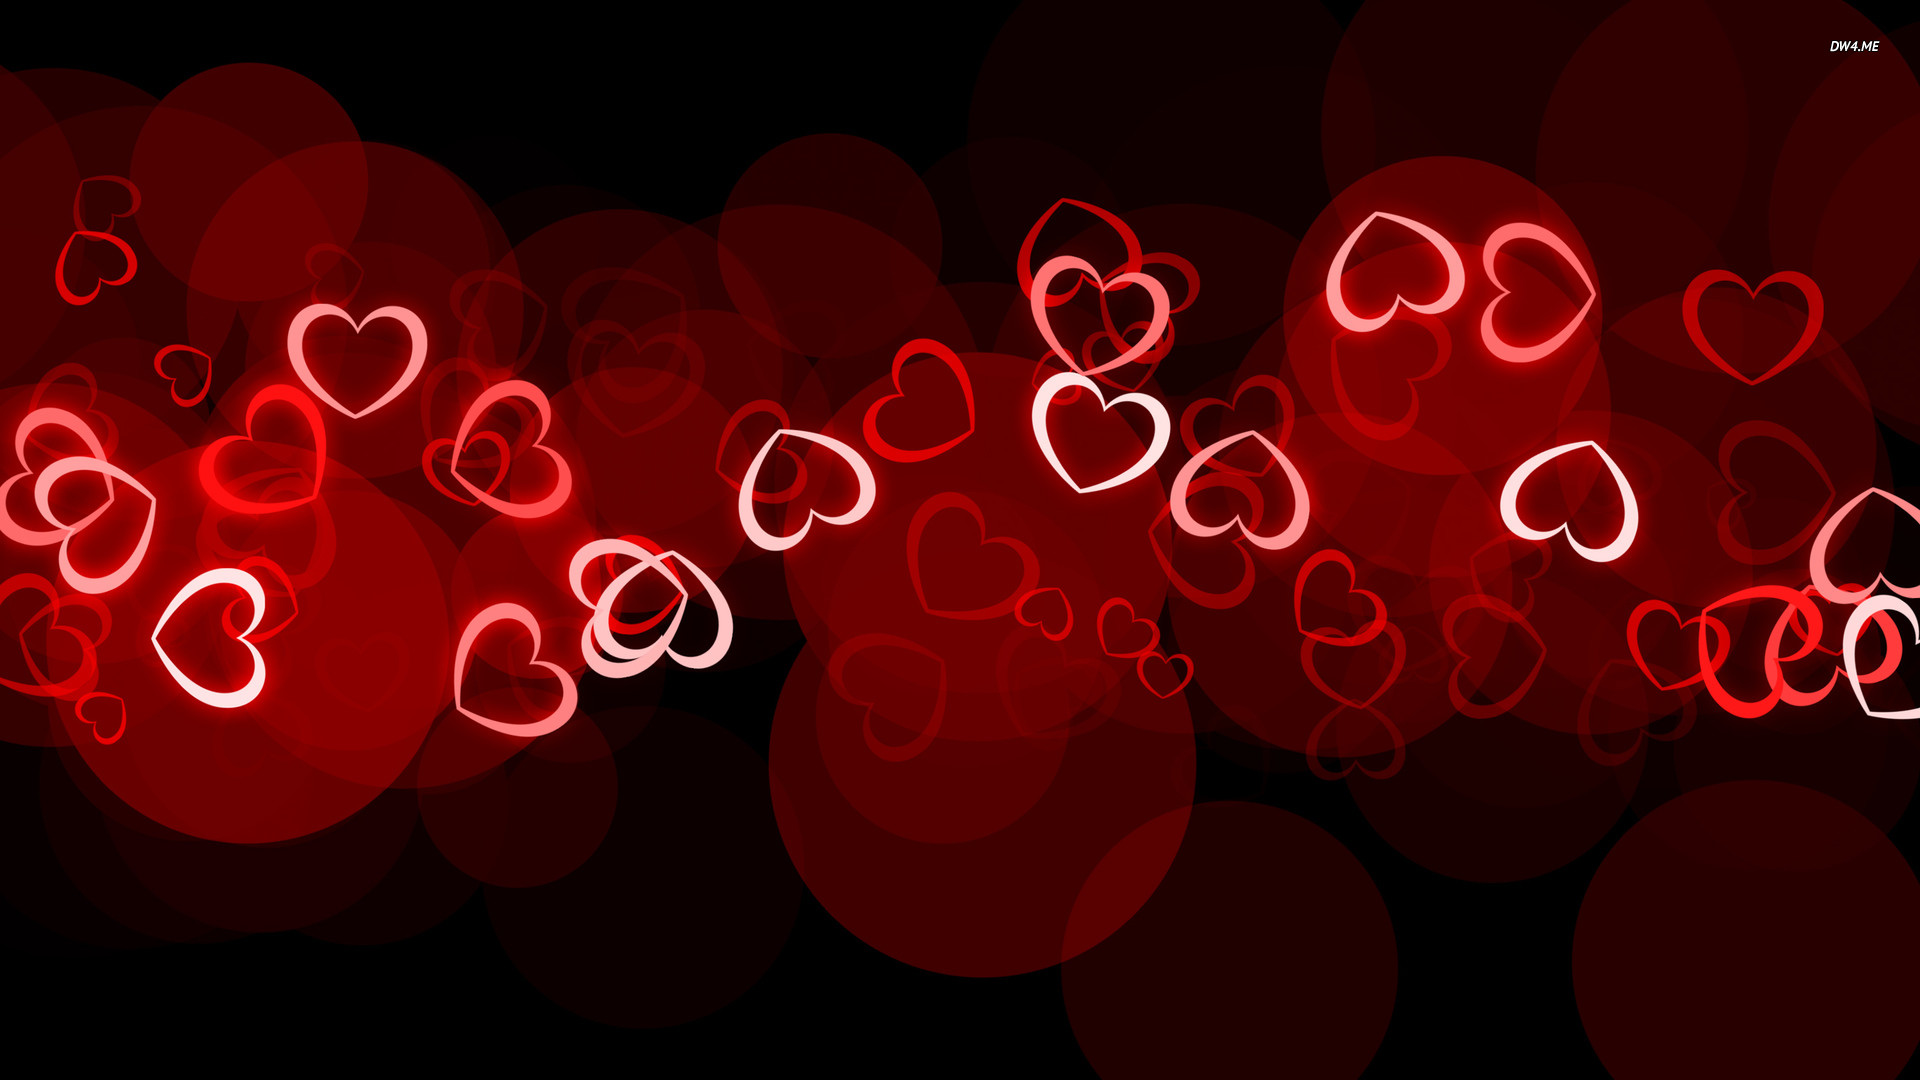 1920x1080 WallpapersWide.com | Valentine's Day HD Desktop Wallpapers for .